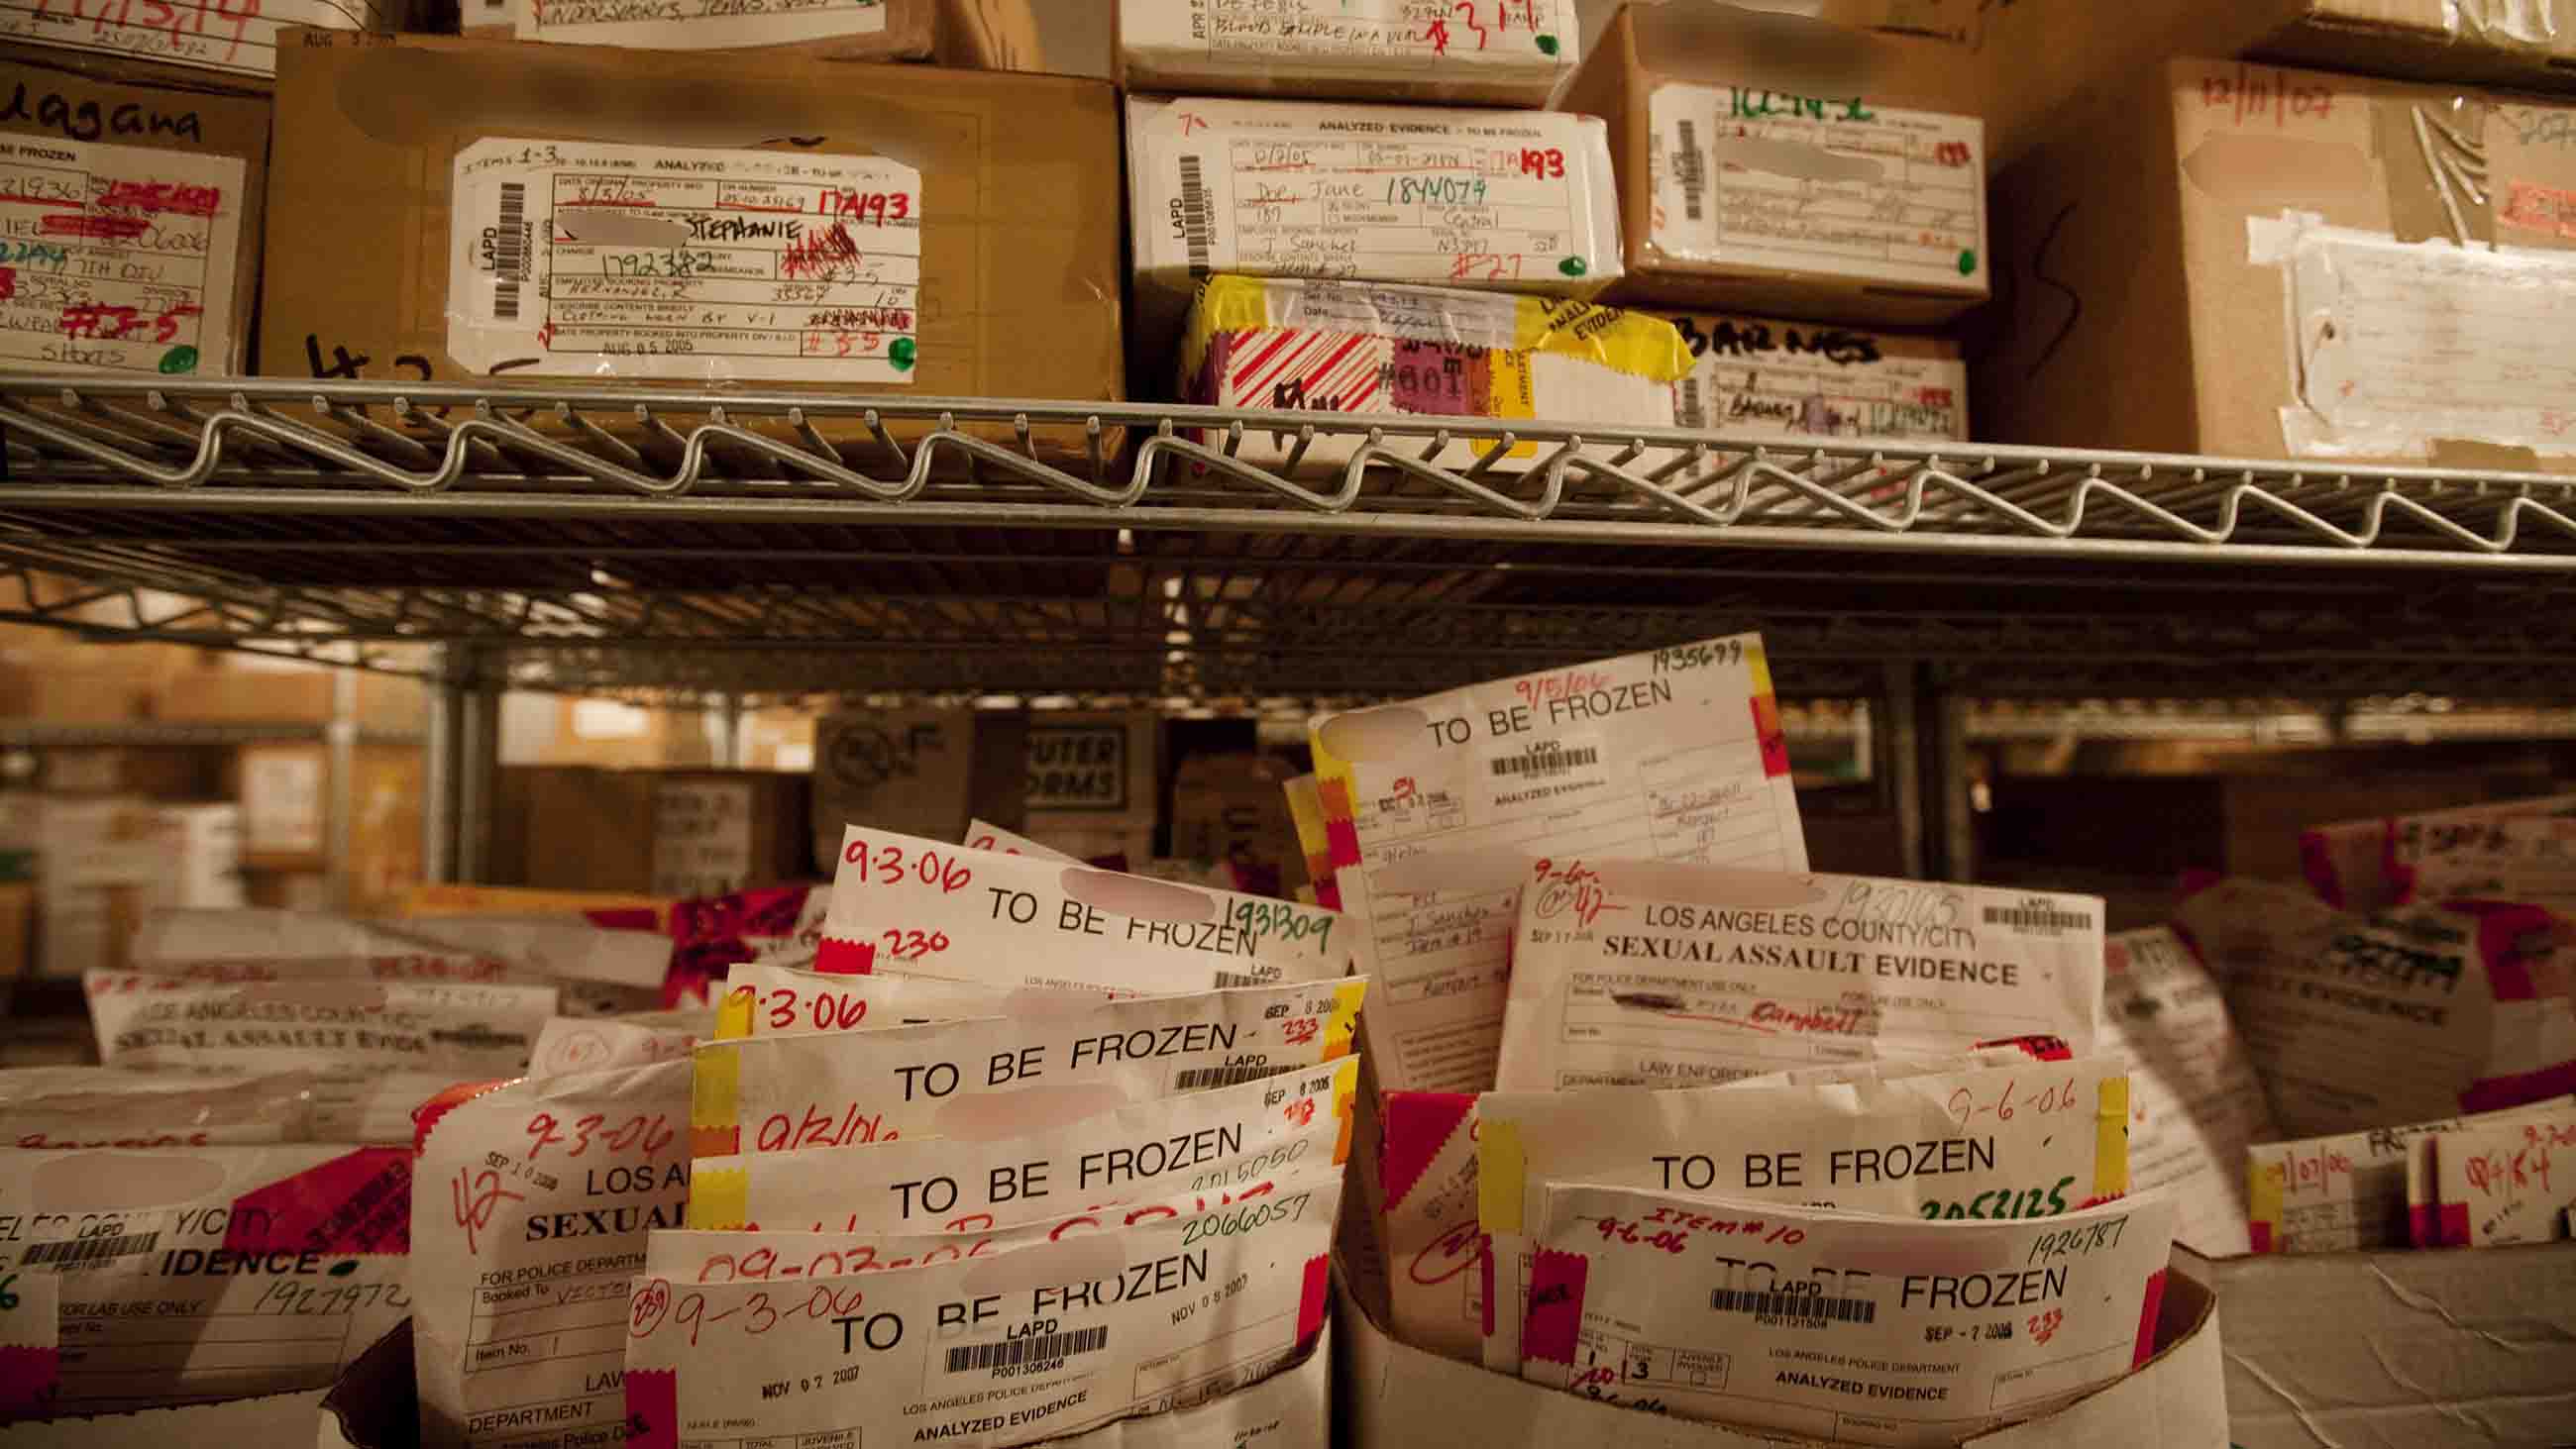 Thousands of envelopes of containing DNA, blood, and other evidence collected from Los Angeles rape victims, sit in LAPD deep freeze lockers untested.